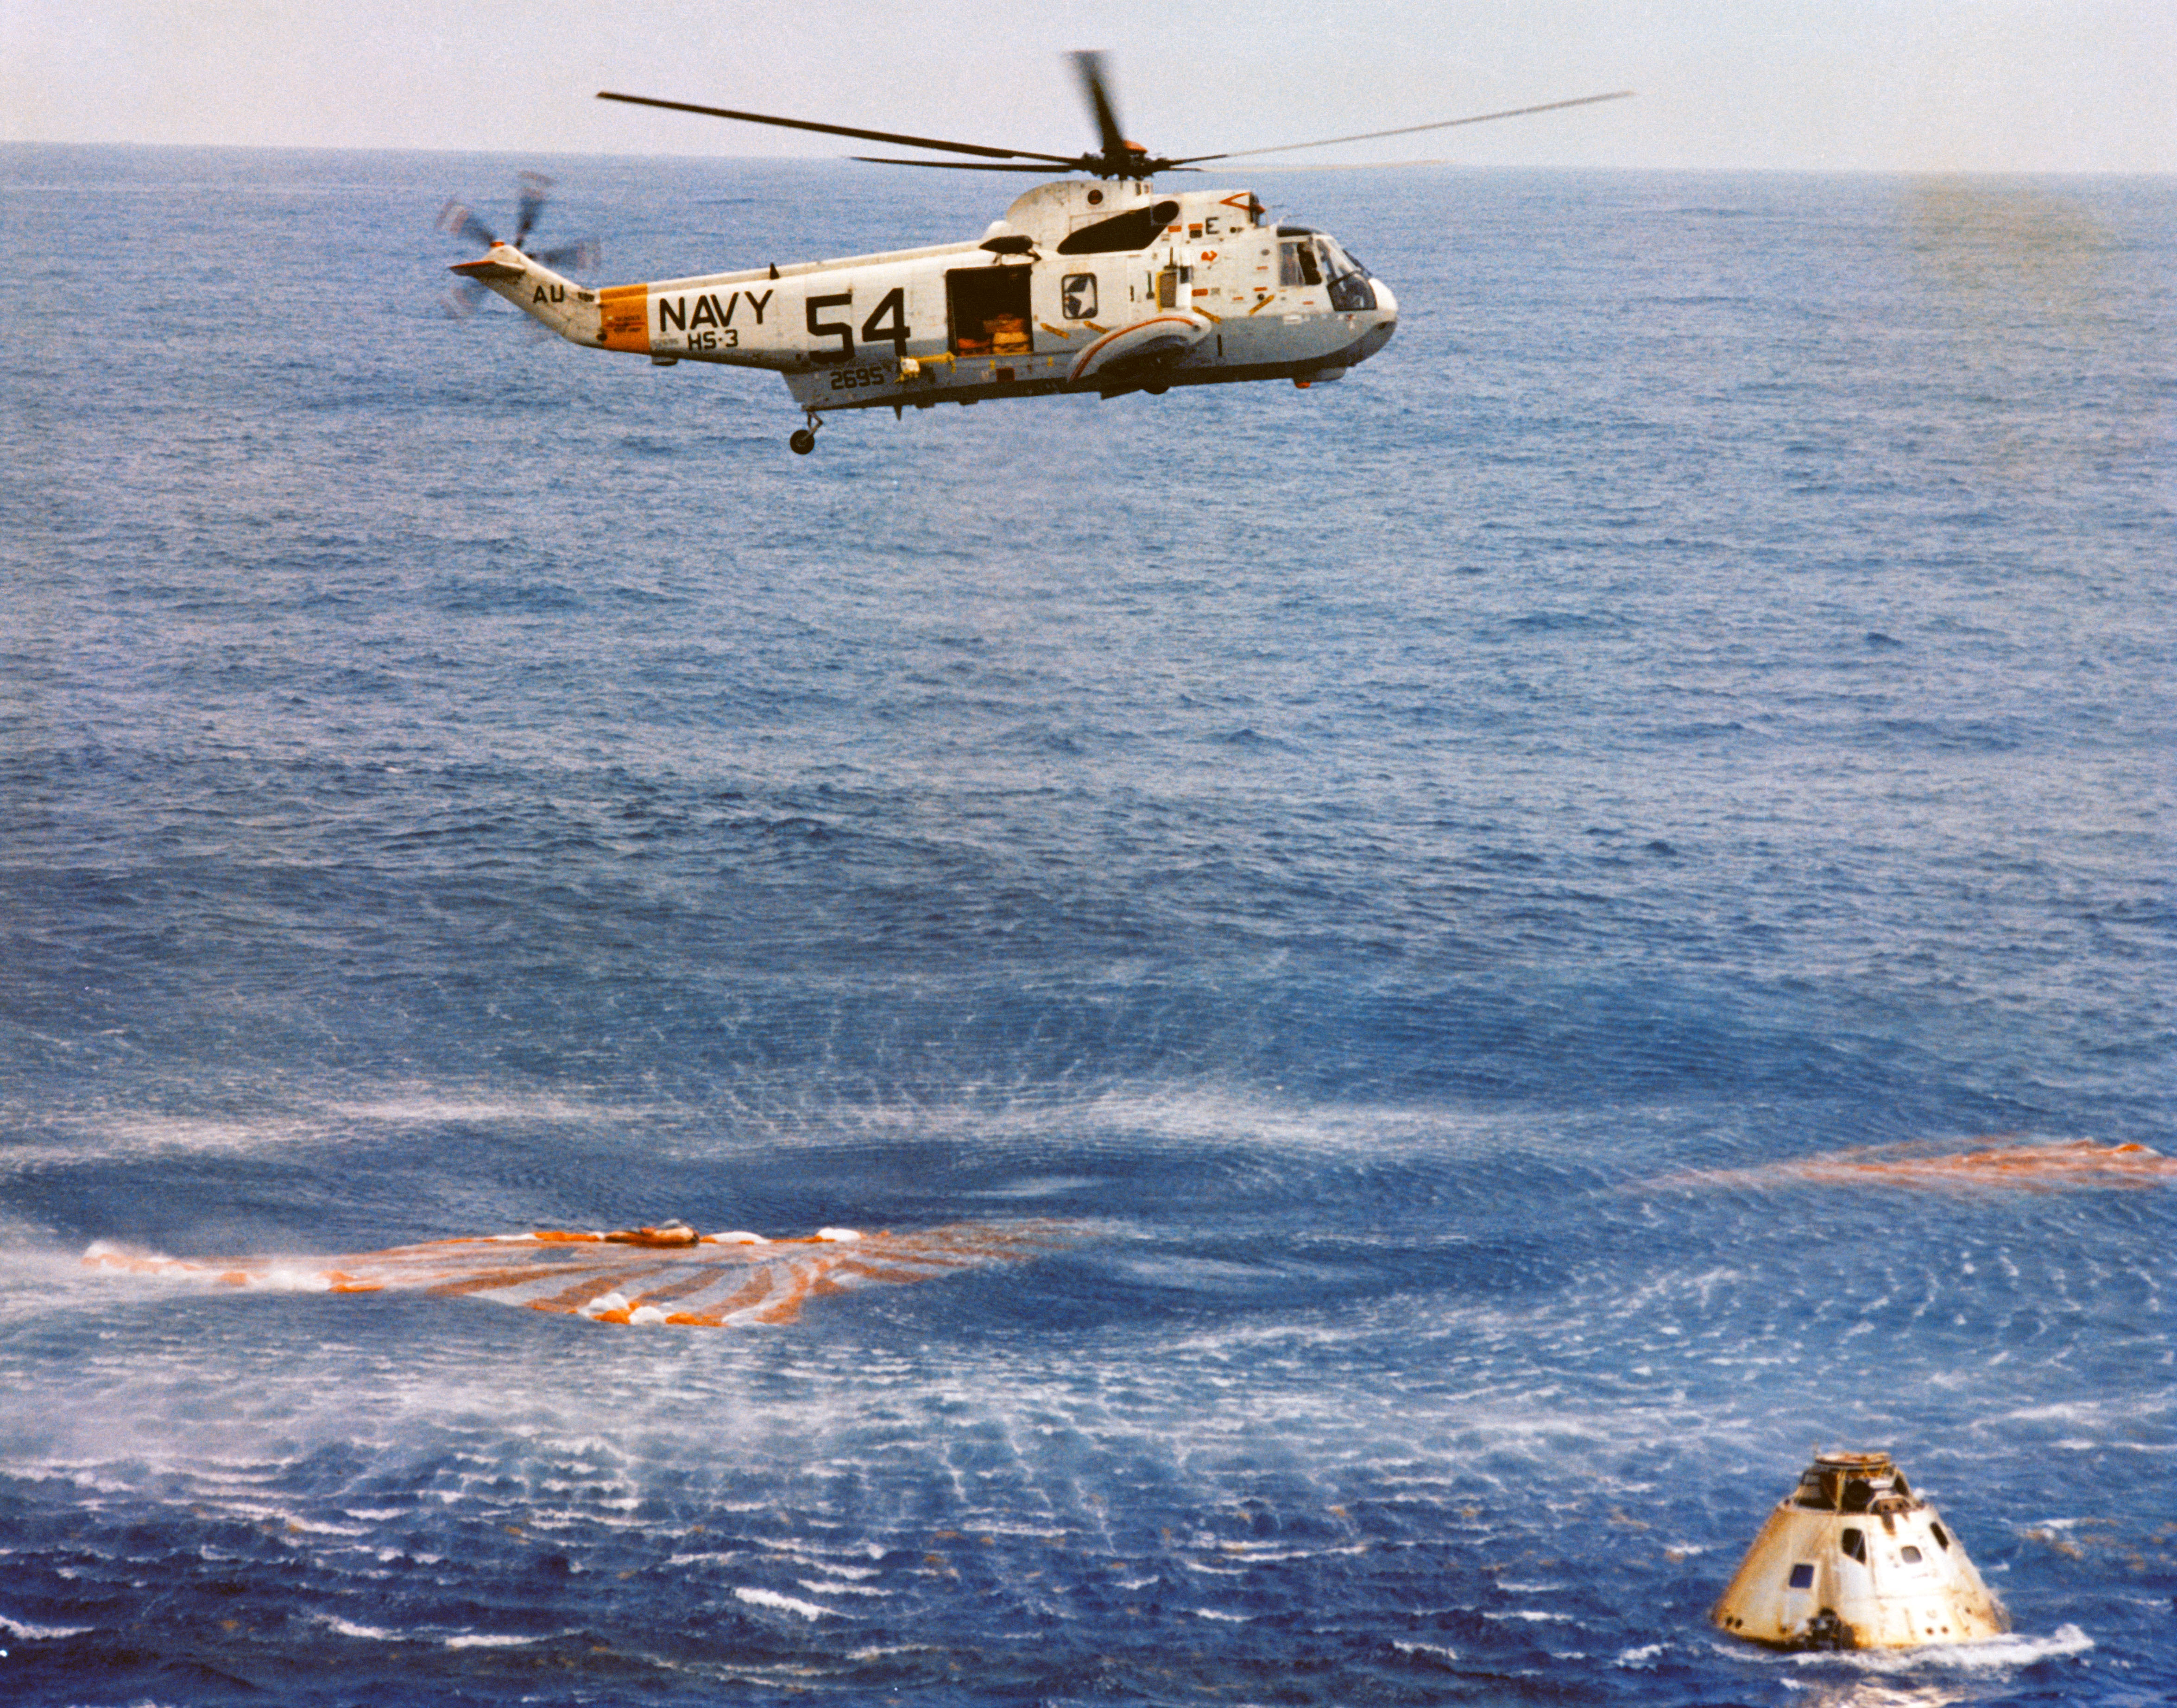 A recovery helicopter with "Navy" and "54" stenciled on it hovers above the water, the wind from its blades creating rings of circles below. Directly below the helicopter is an orange and white parachute. At bottom right is the Apollo 9 command module, where the astronauts await recovery.